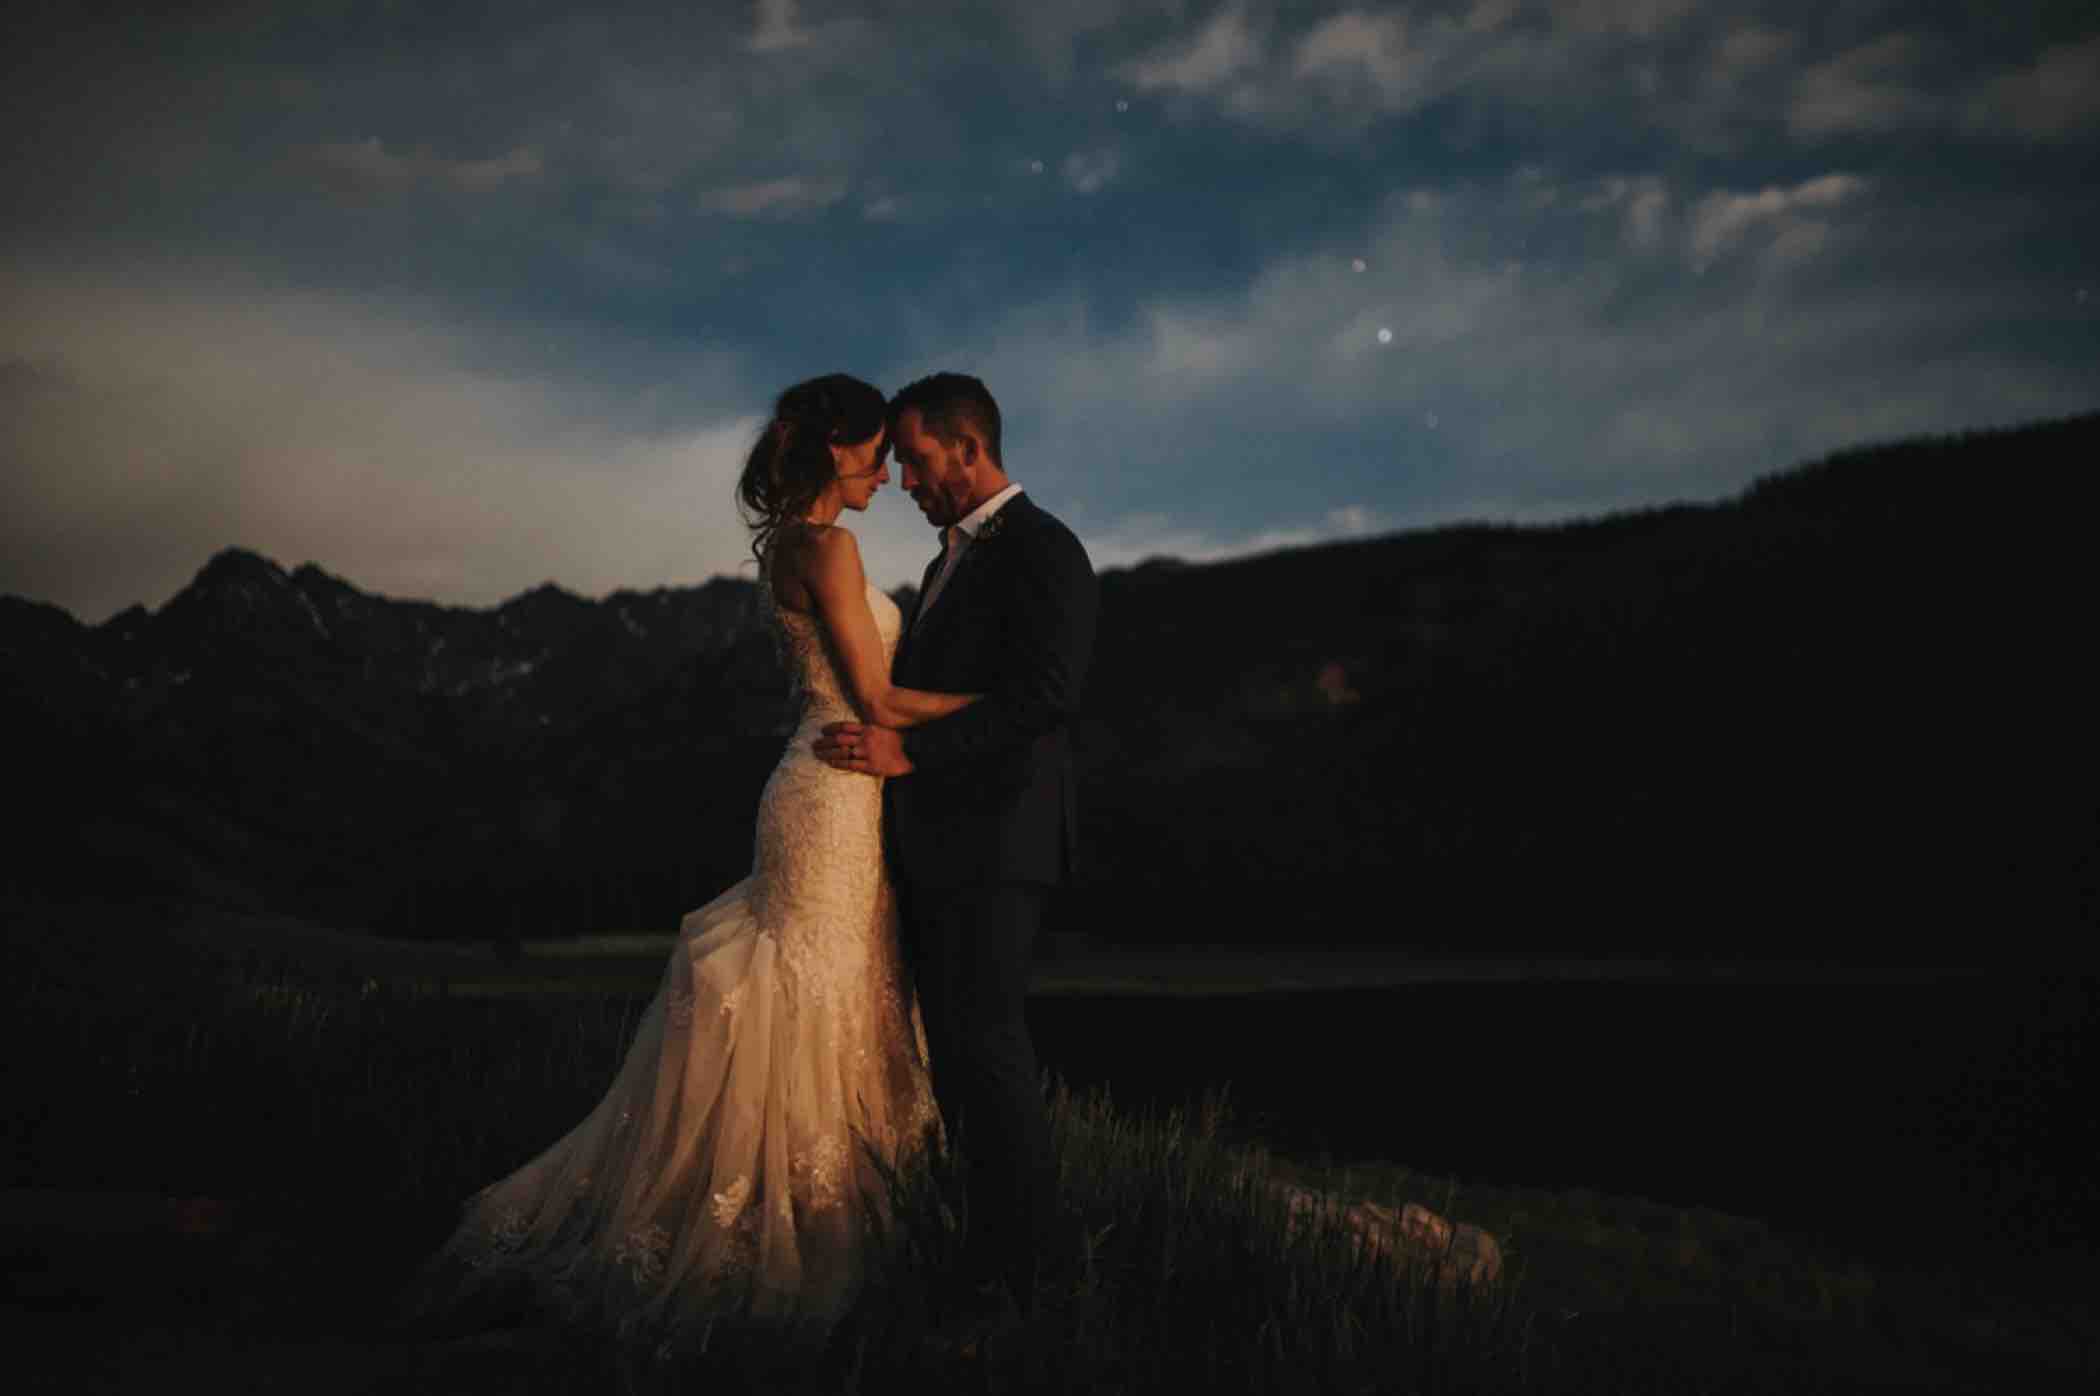 Bride and groom sunset portrait at Gore Range in Piney River Ranch in the White River National Forest outside Vail, Colorado. Photo by Ali and Garrett, Romantic, Adventurous, Nostalgic Wedding Photographers.